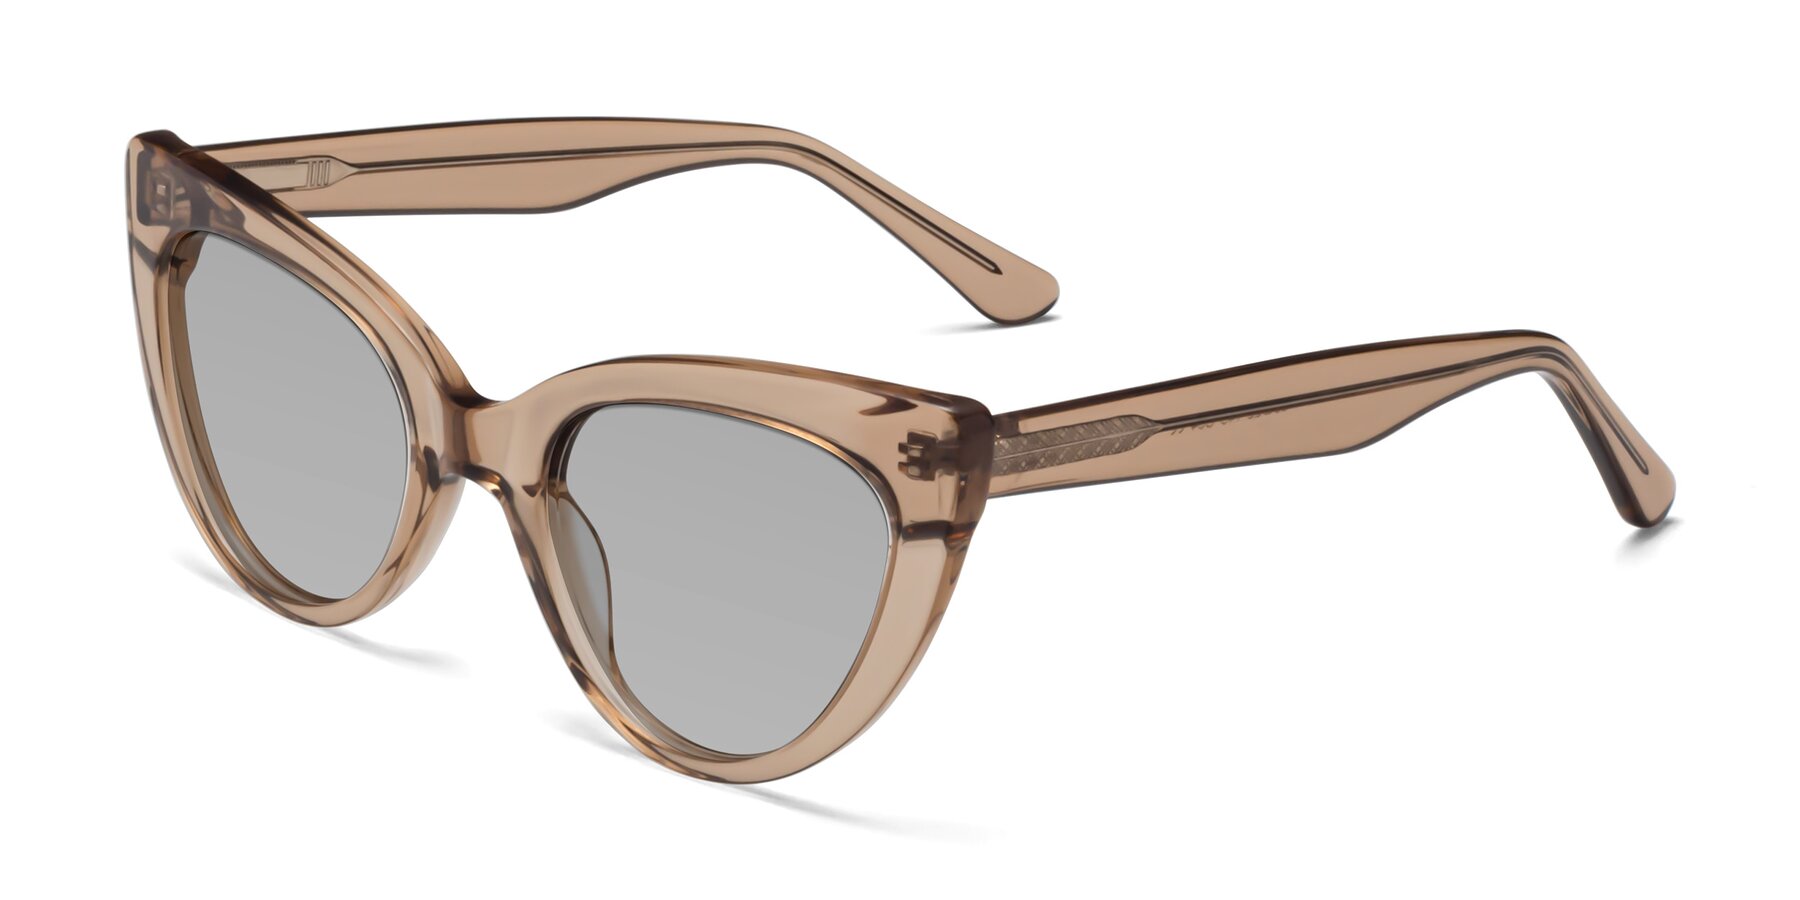 Angle of Tiesi in Caramel with Light Gray Tinted Lenses